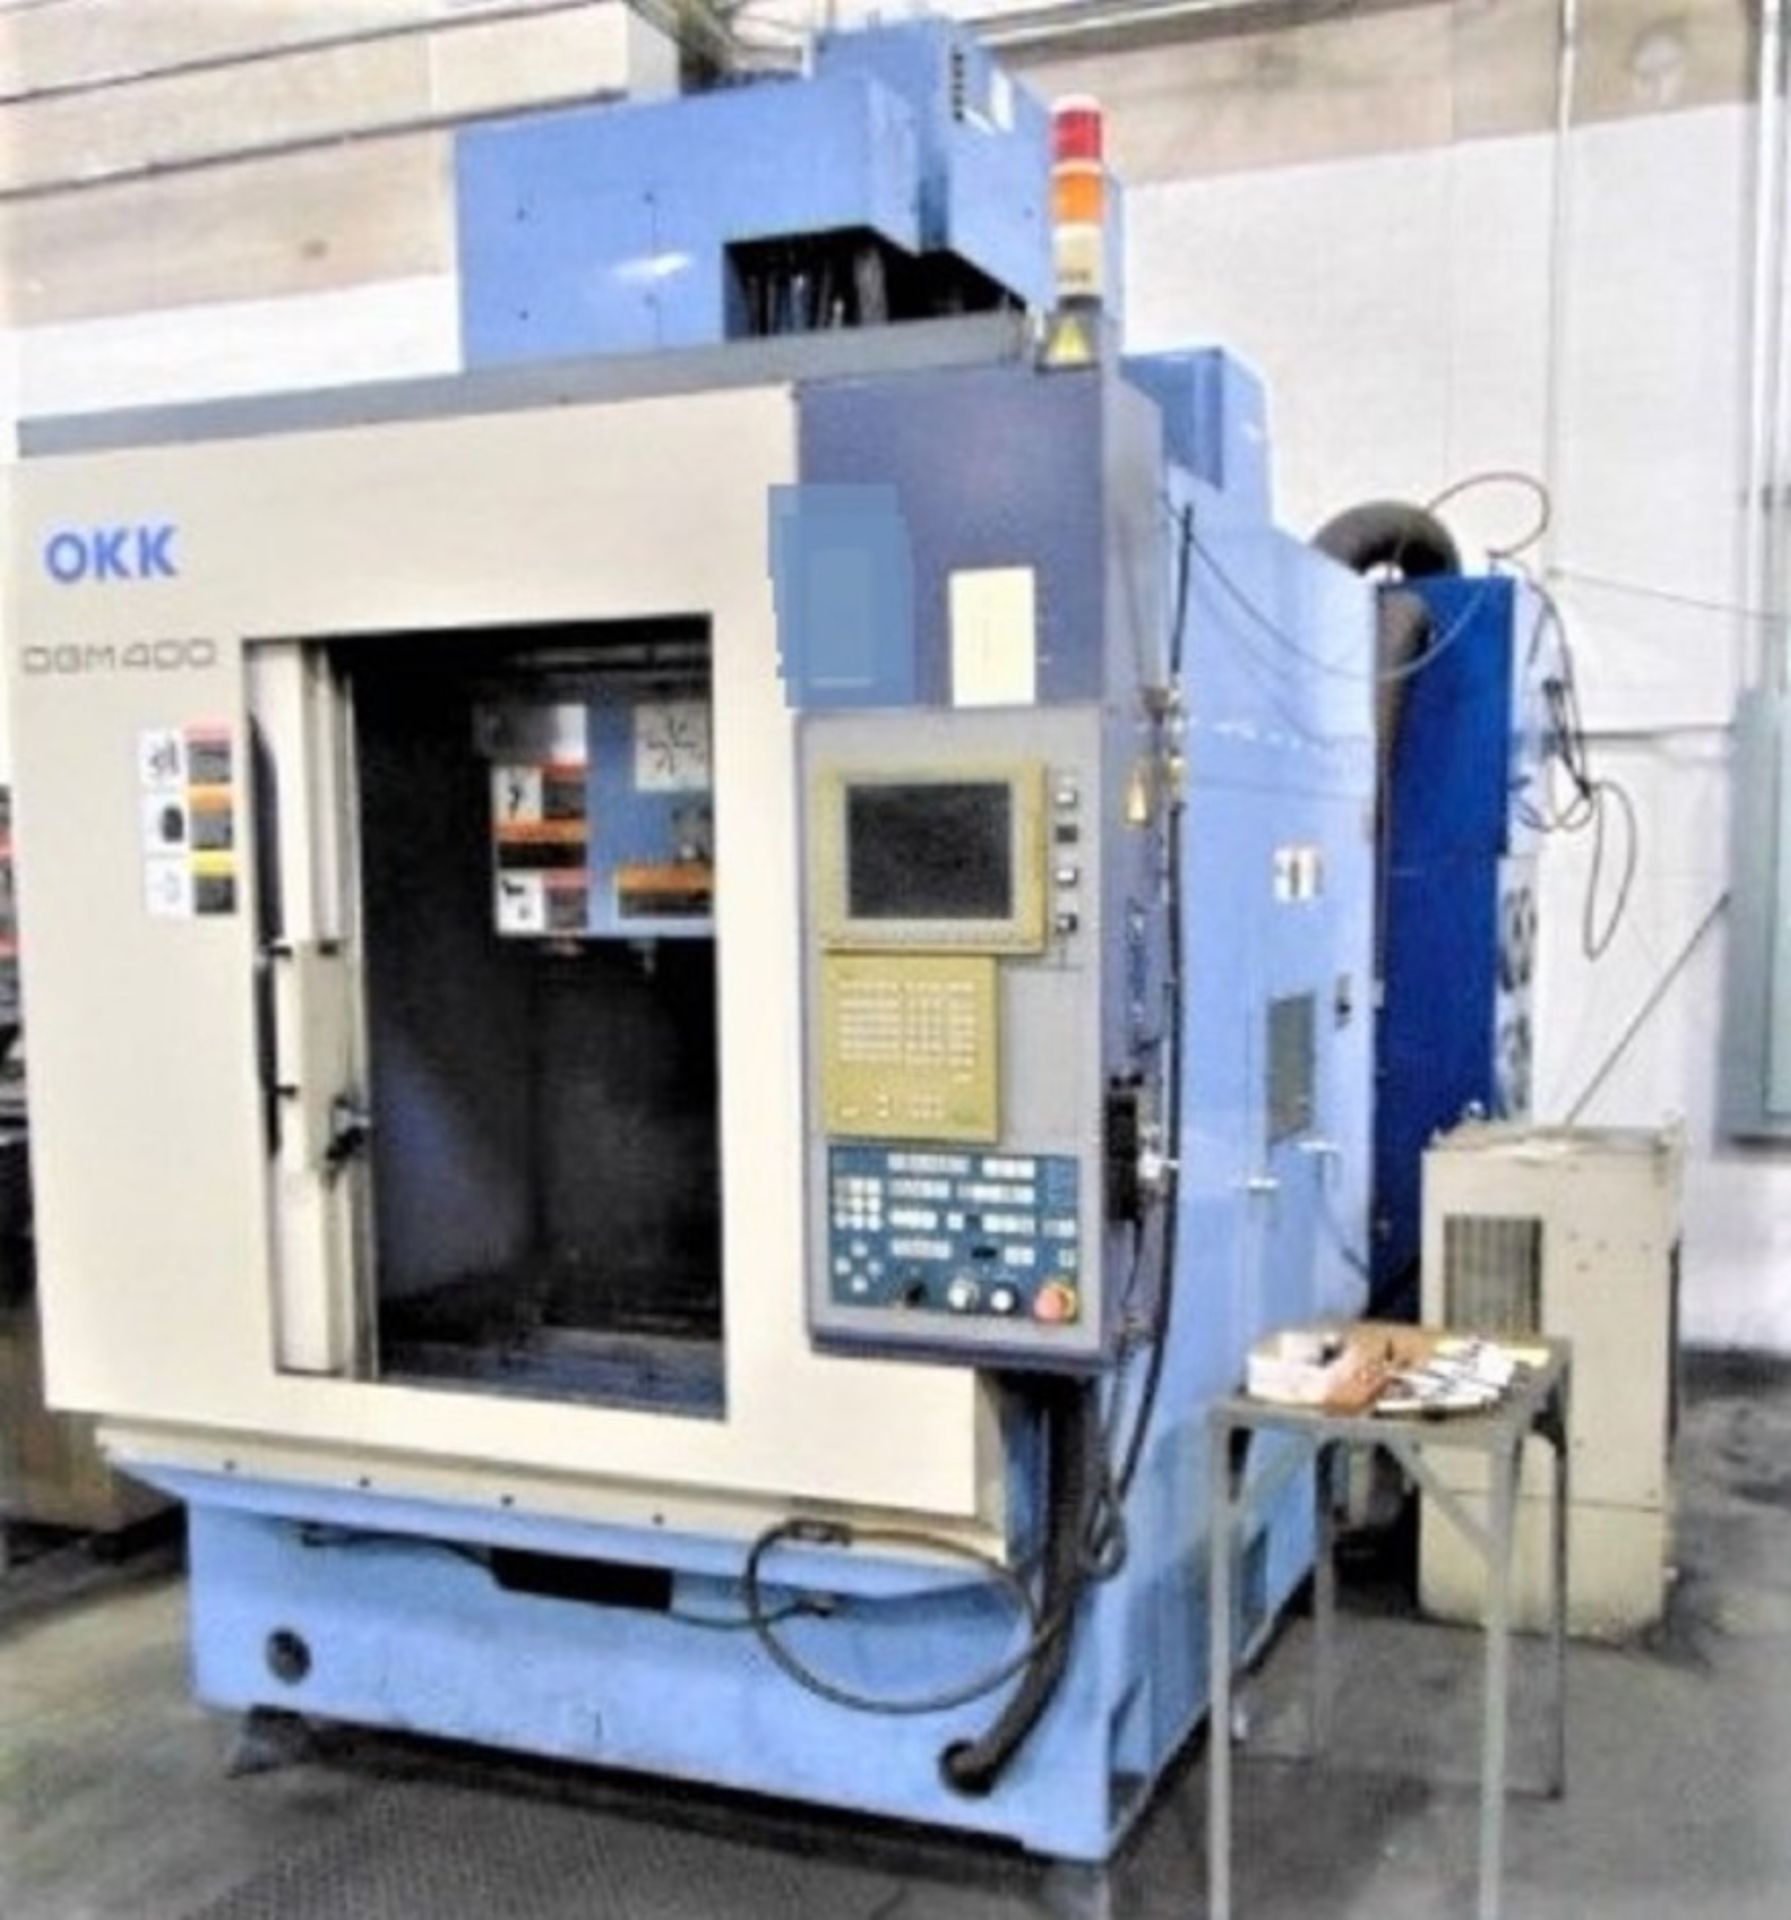 SOLD*SOLD*SOLD OKK DGM400 3-Axis CNC High Speed Graphite Machining Center, s/N 115, New 2000